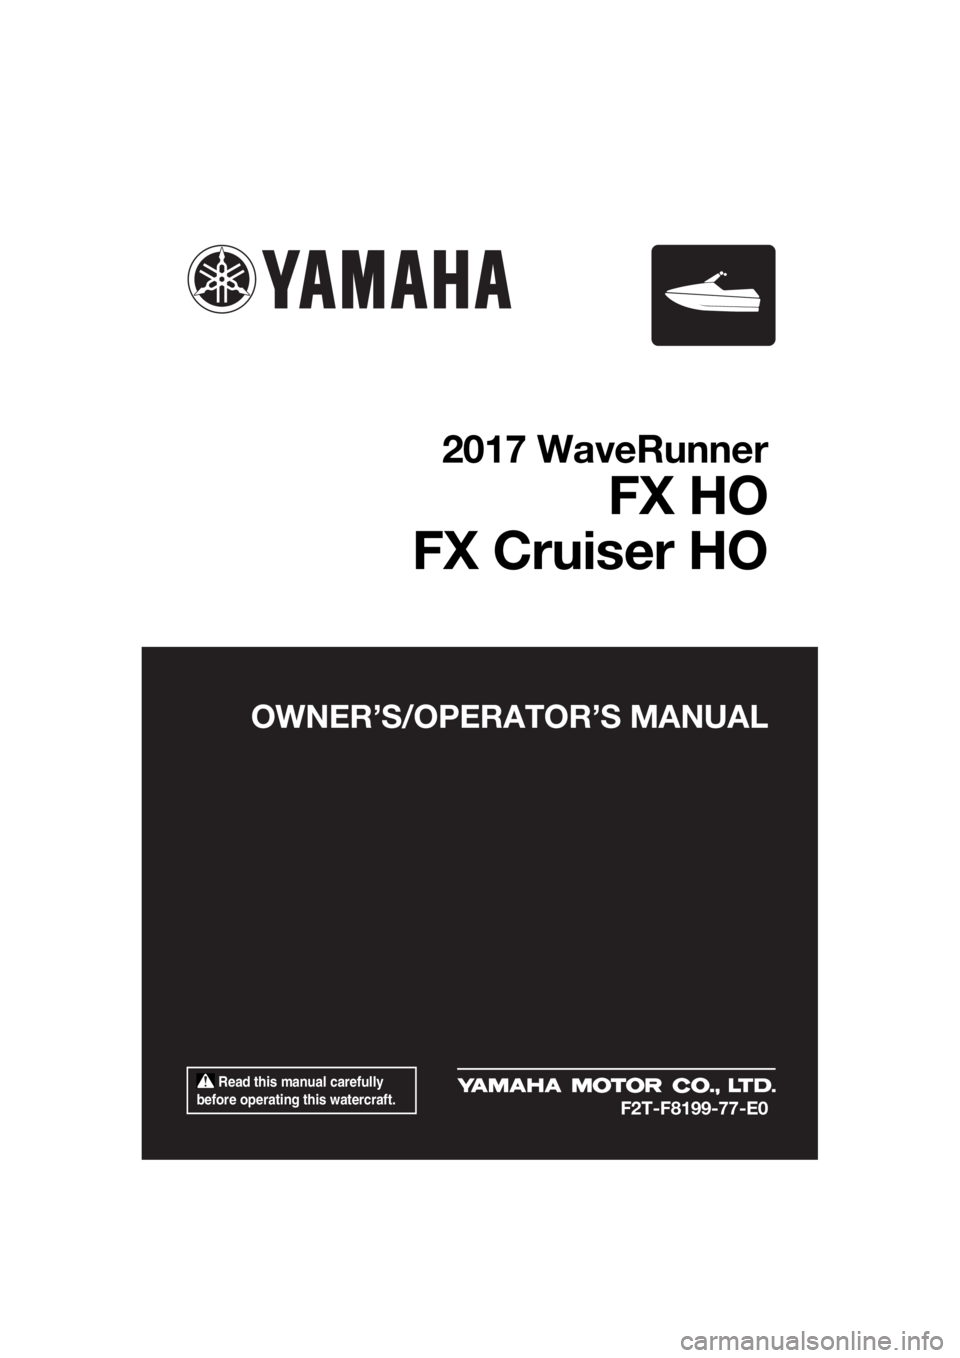 YAMAHA FX HO 2017  Owners Manual  Read this manual carefully 
before operating this watercraft.
OWNER’S/OPERATOR’S MANUAL
2017 WaveRunner
FX HO
FX Cruiser HO
F2T-F8199-77-E0
UF2T77E0.book  Page 1  Monday, July 11, 2016  9:31 AM 